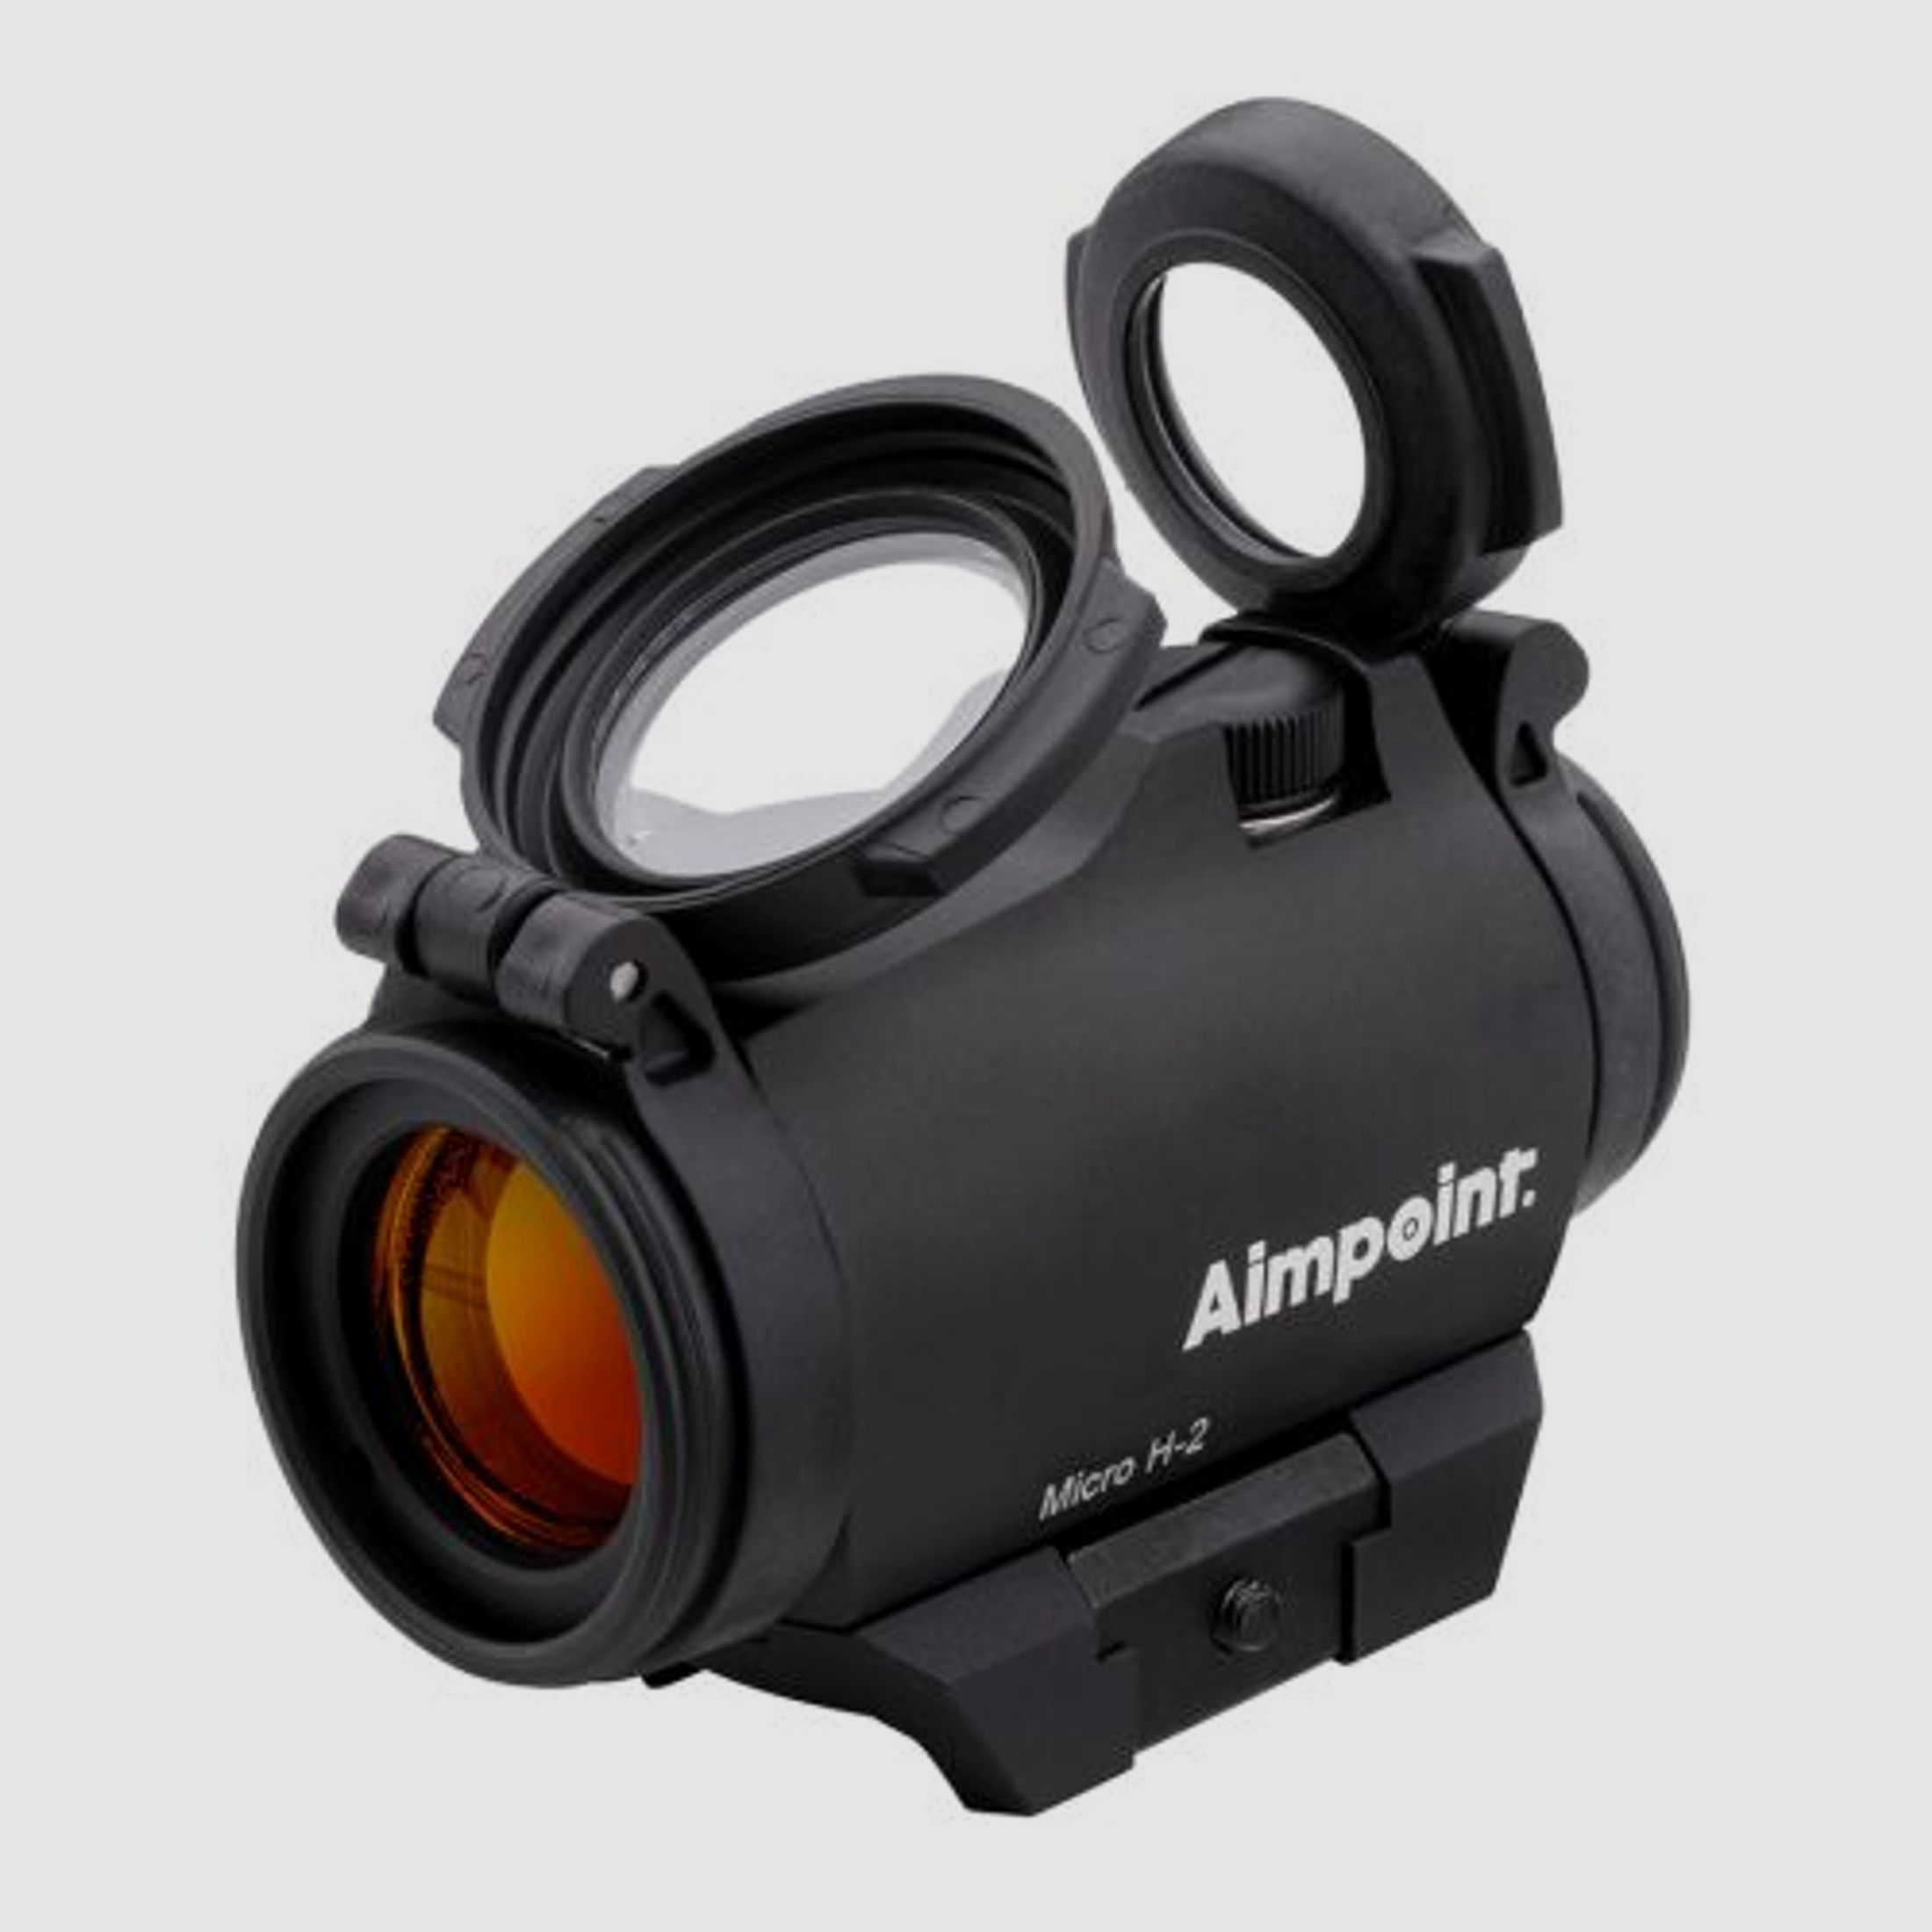 Aimpoint Micro H-2 2 MOA inkl. Adapter f?r Weaver/Picatinny